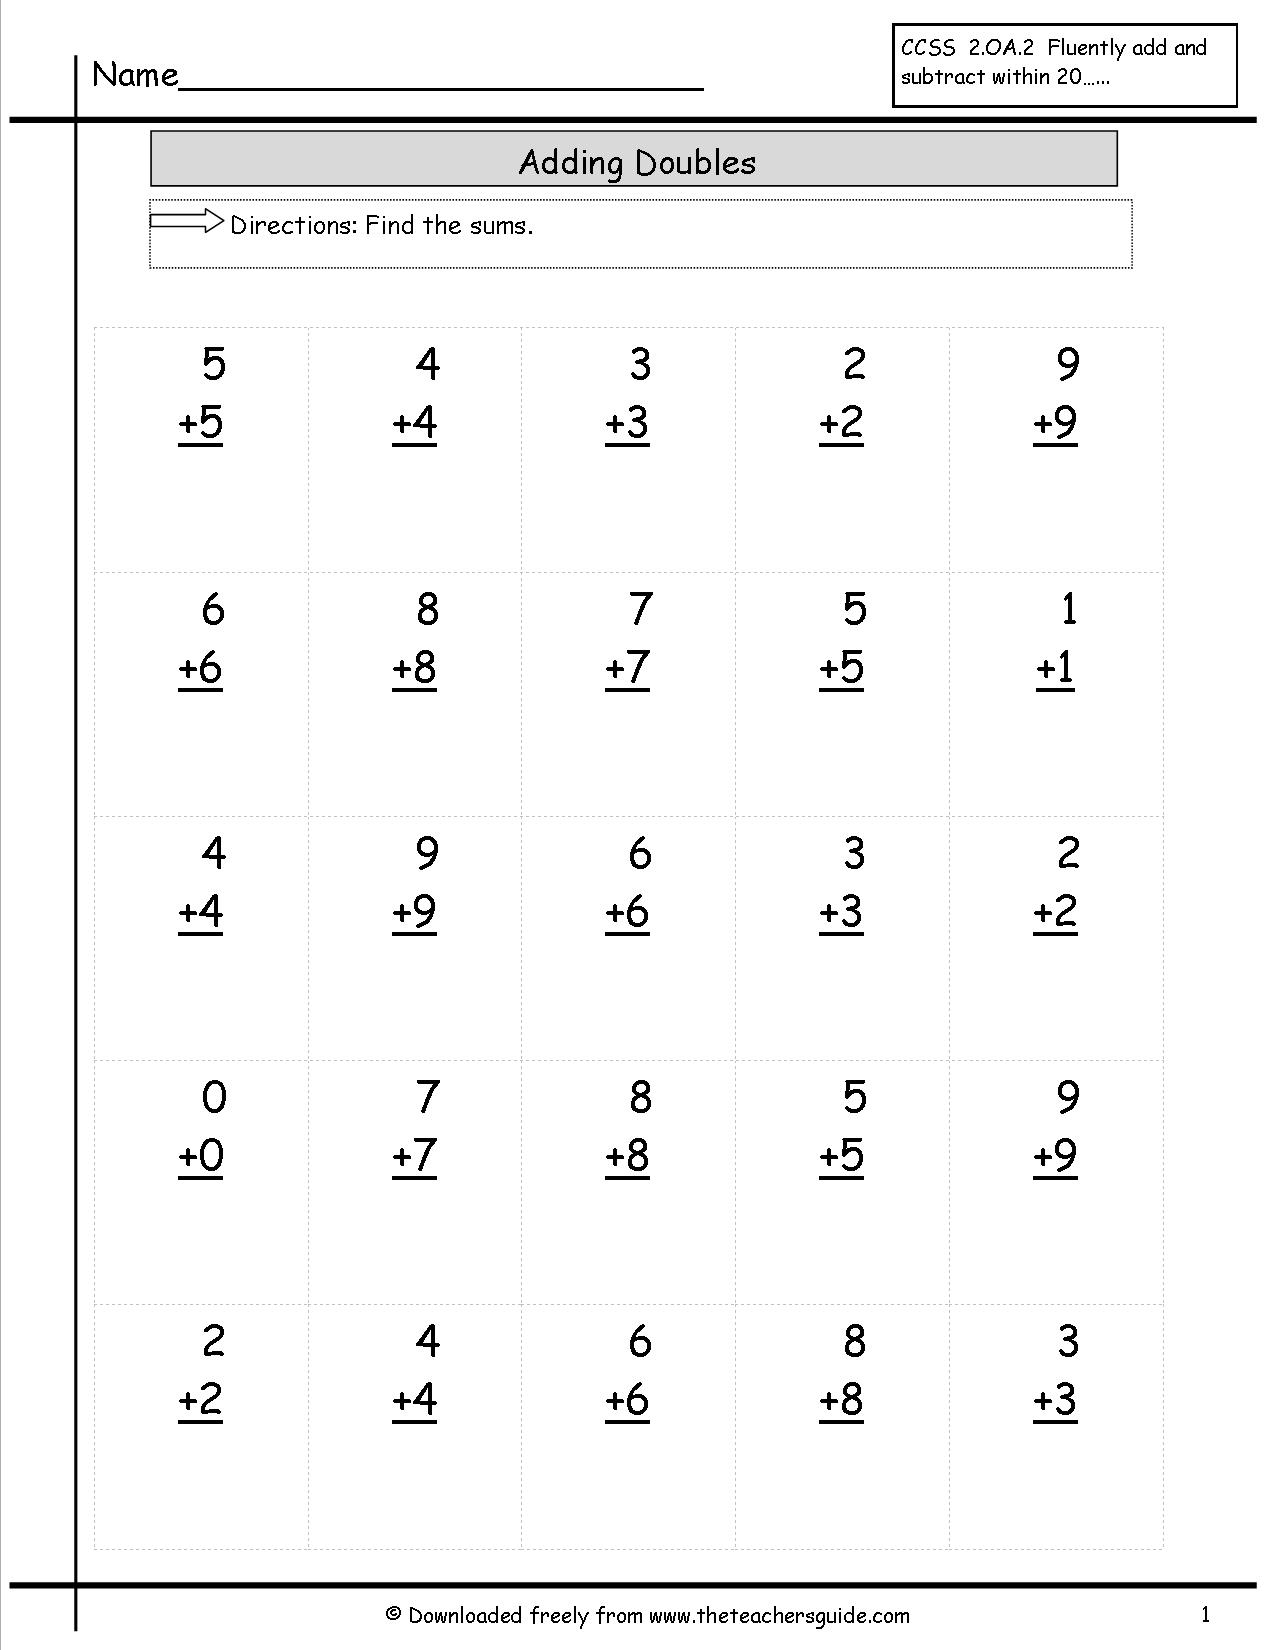 Math Addition Doubles Facts Worksheet Image